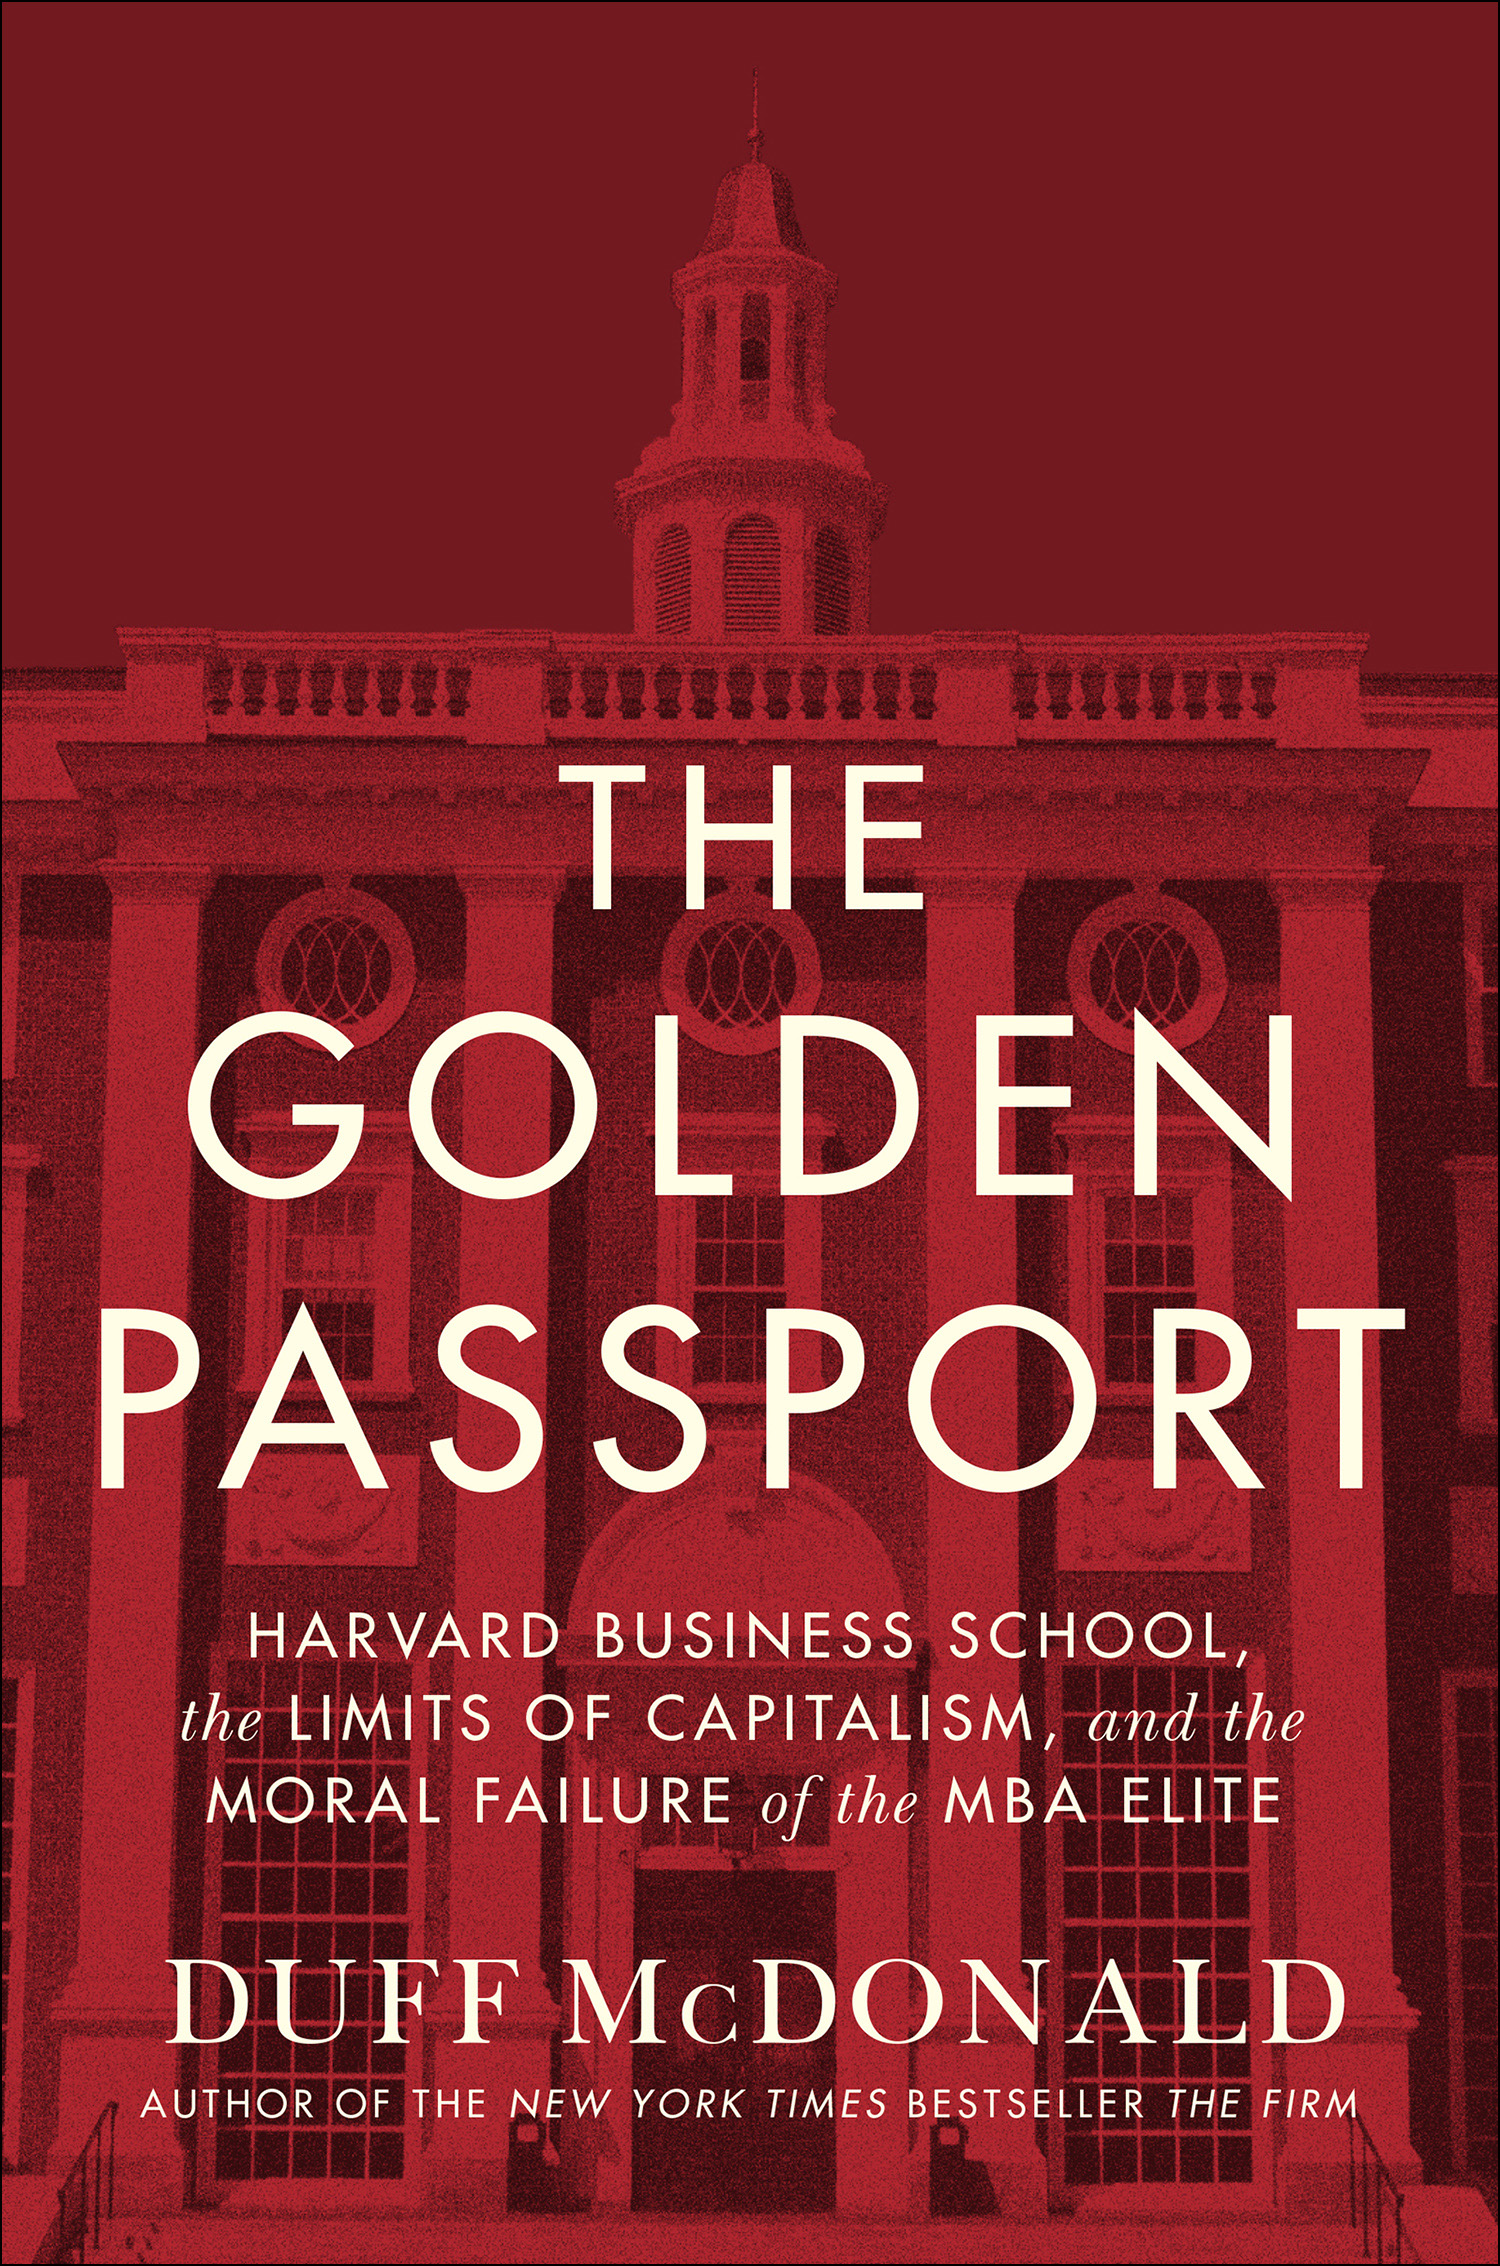 The golden passport Harvard Business School, the limits of capitalism, and the moral failure of the MBA elite cover image